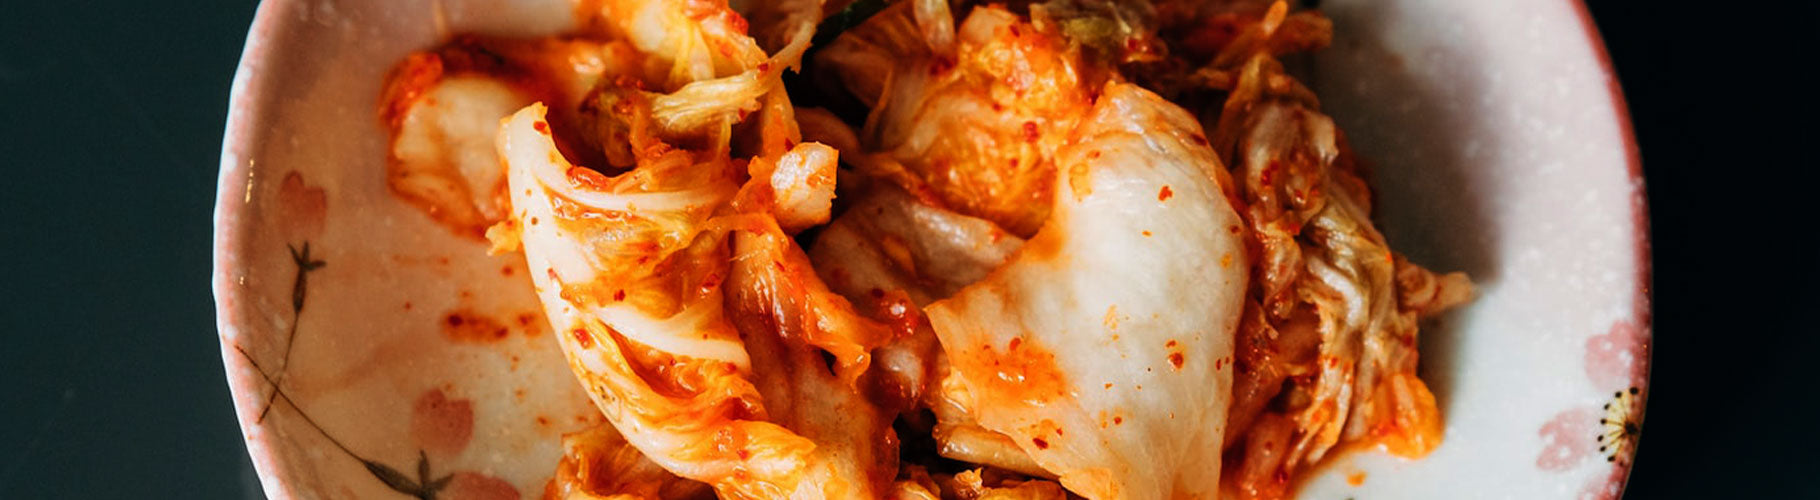 An image that shows a kimchi bowl